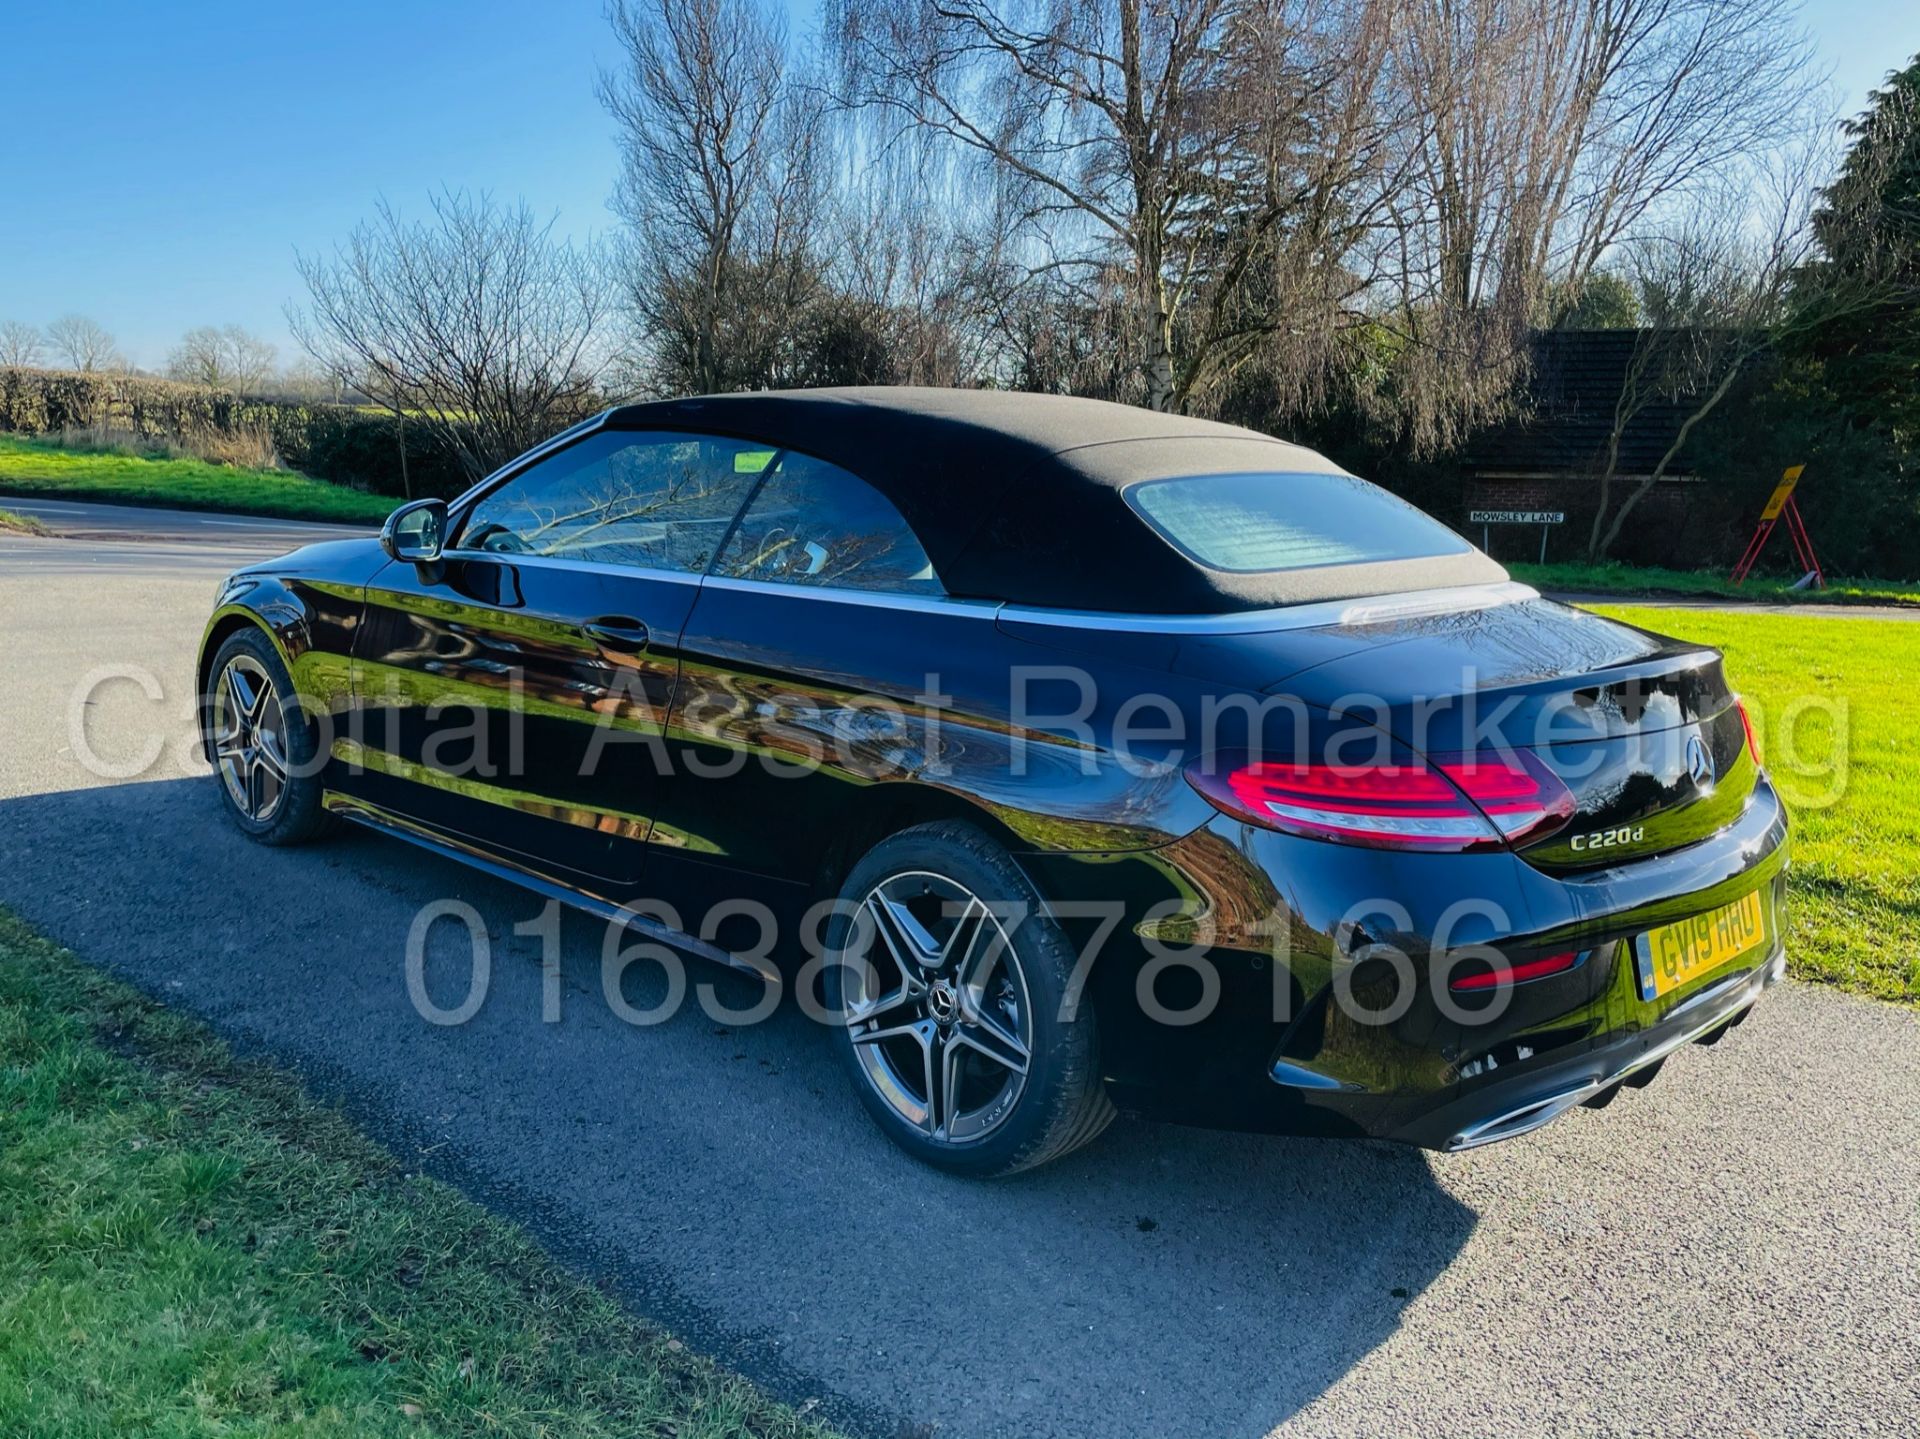 ON SALE MERCEDES-BENZ C220D *AMG LINE - CABRIOLET* (2019) '9G TRONIC AUTO - LEATHER - SAT NAV' - Image 10 of 59